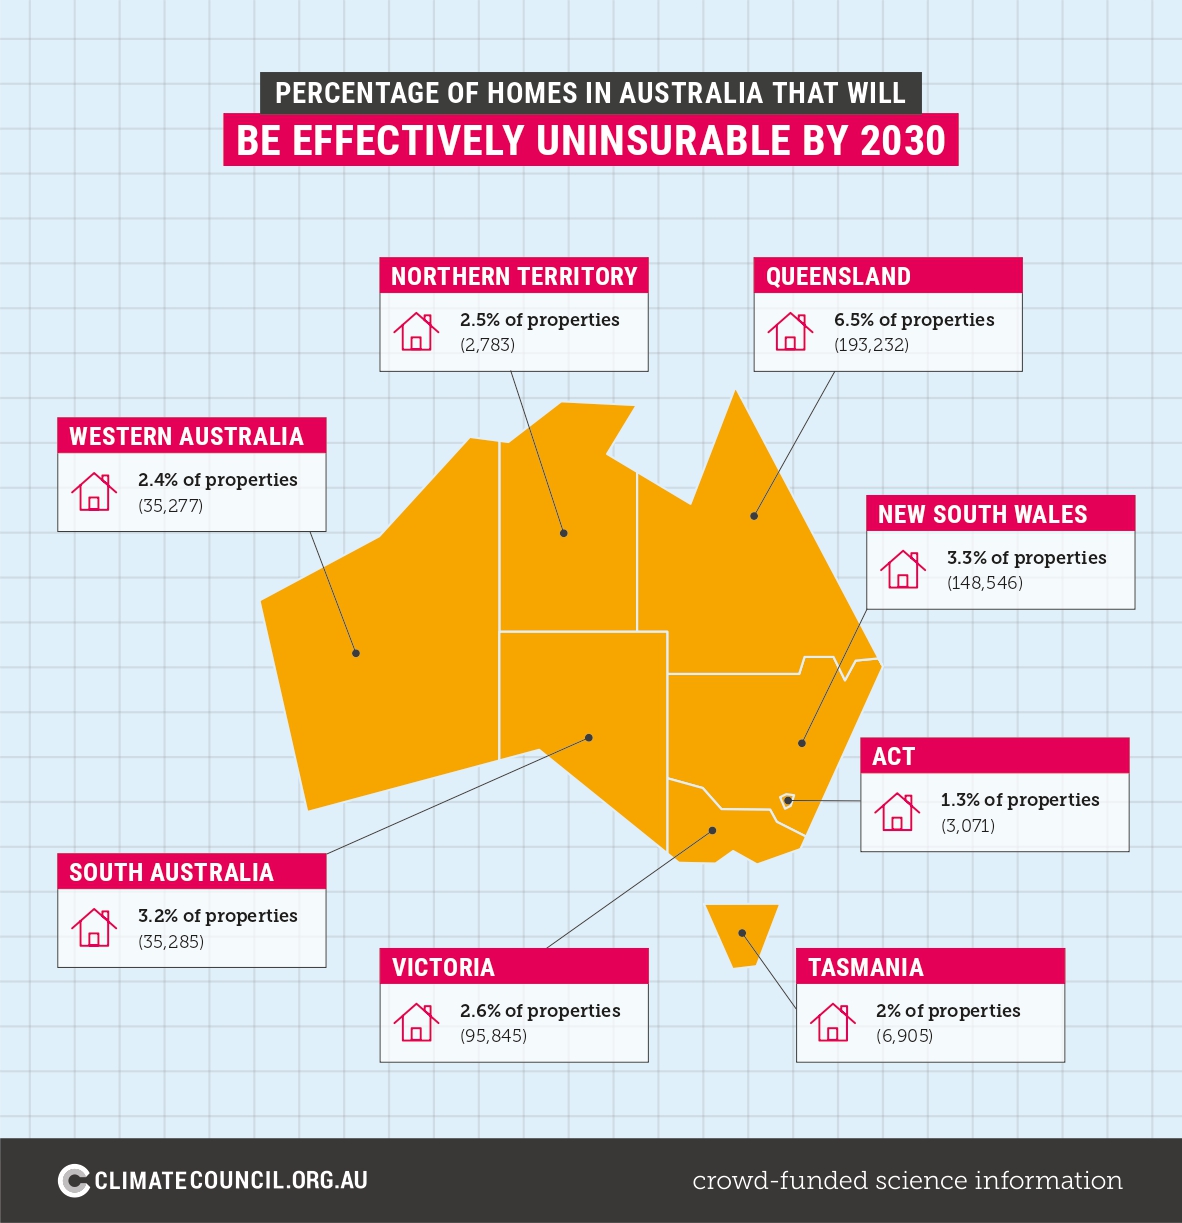 A map of Australia showing the percentage of uninsurable homes.